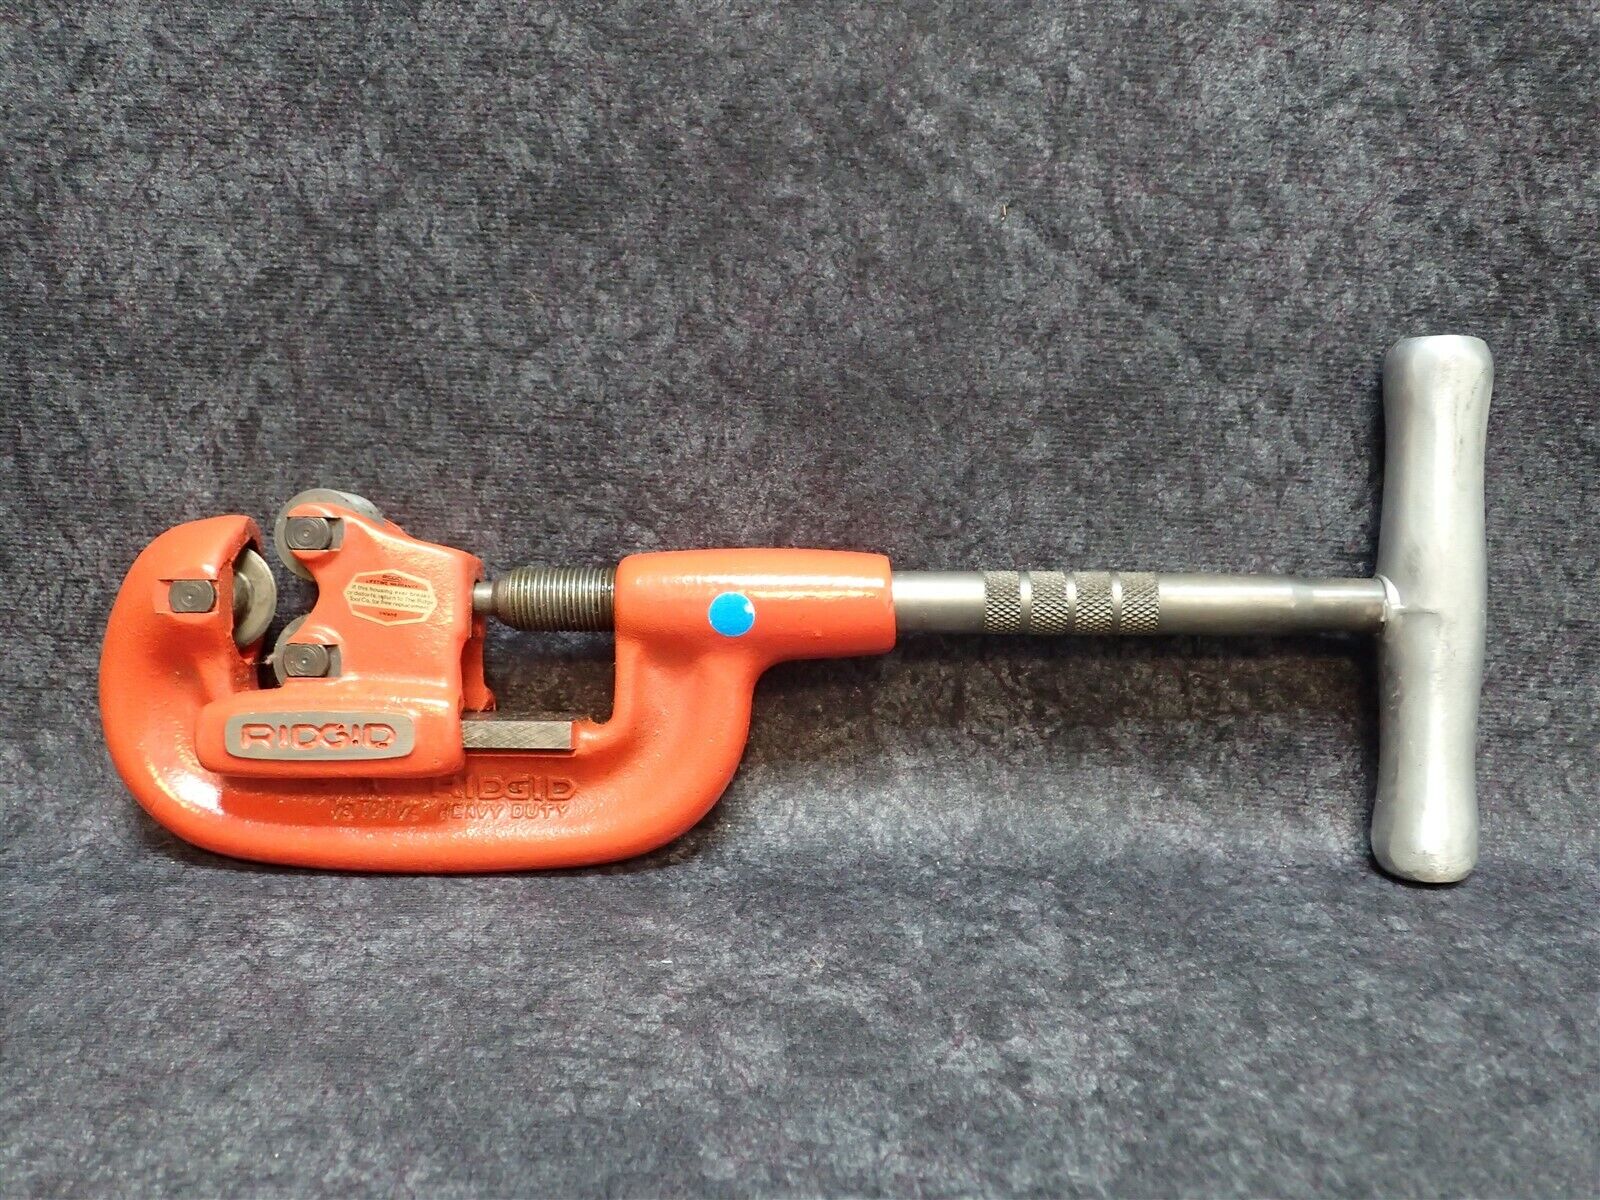 32810 Ridgid Model 1-A Heavy Duty Red Pipe Cutter 1/8" to 1-1/4" (3-32mm)